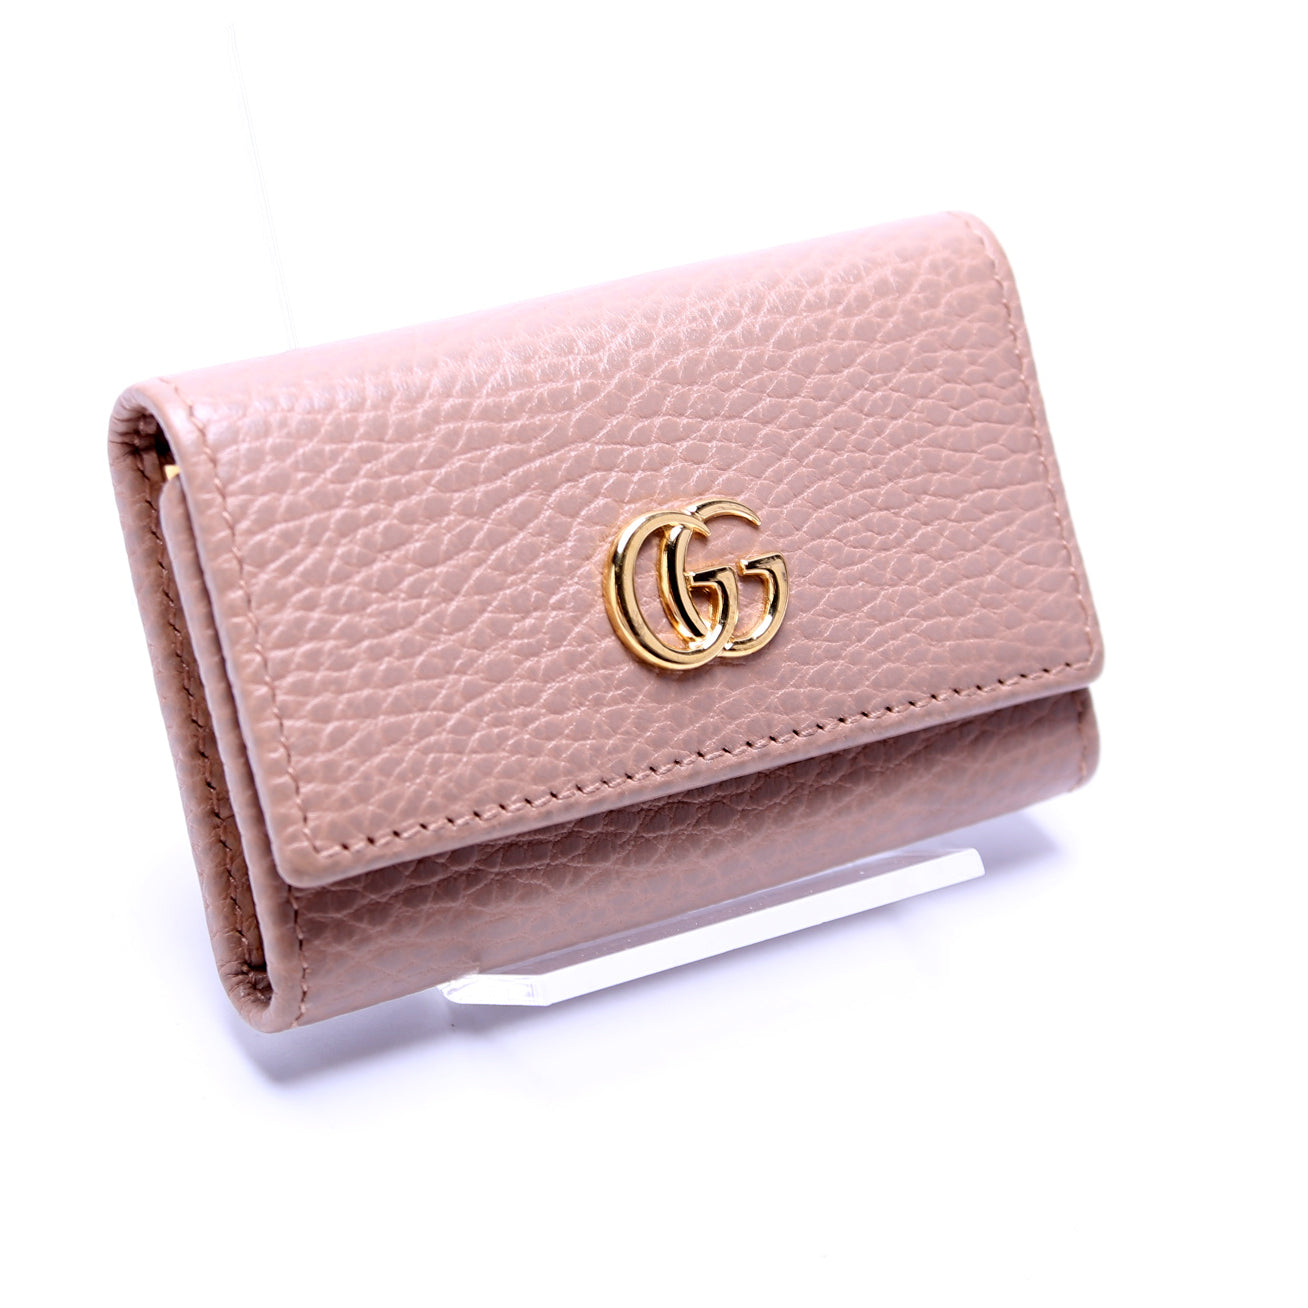 Gucci Key Case GG Marmont Pink Beige Brown Leather Rare Women's Size 6 x  9.5 cm